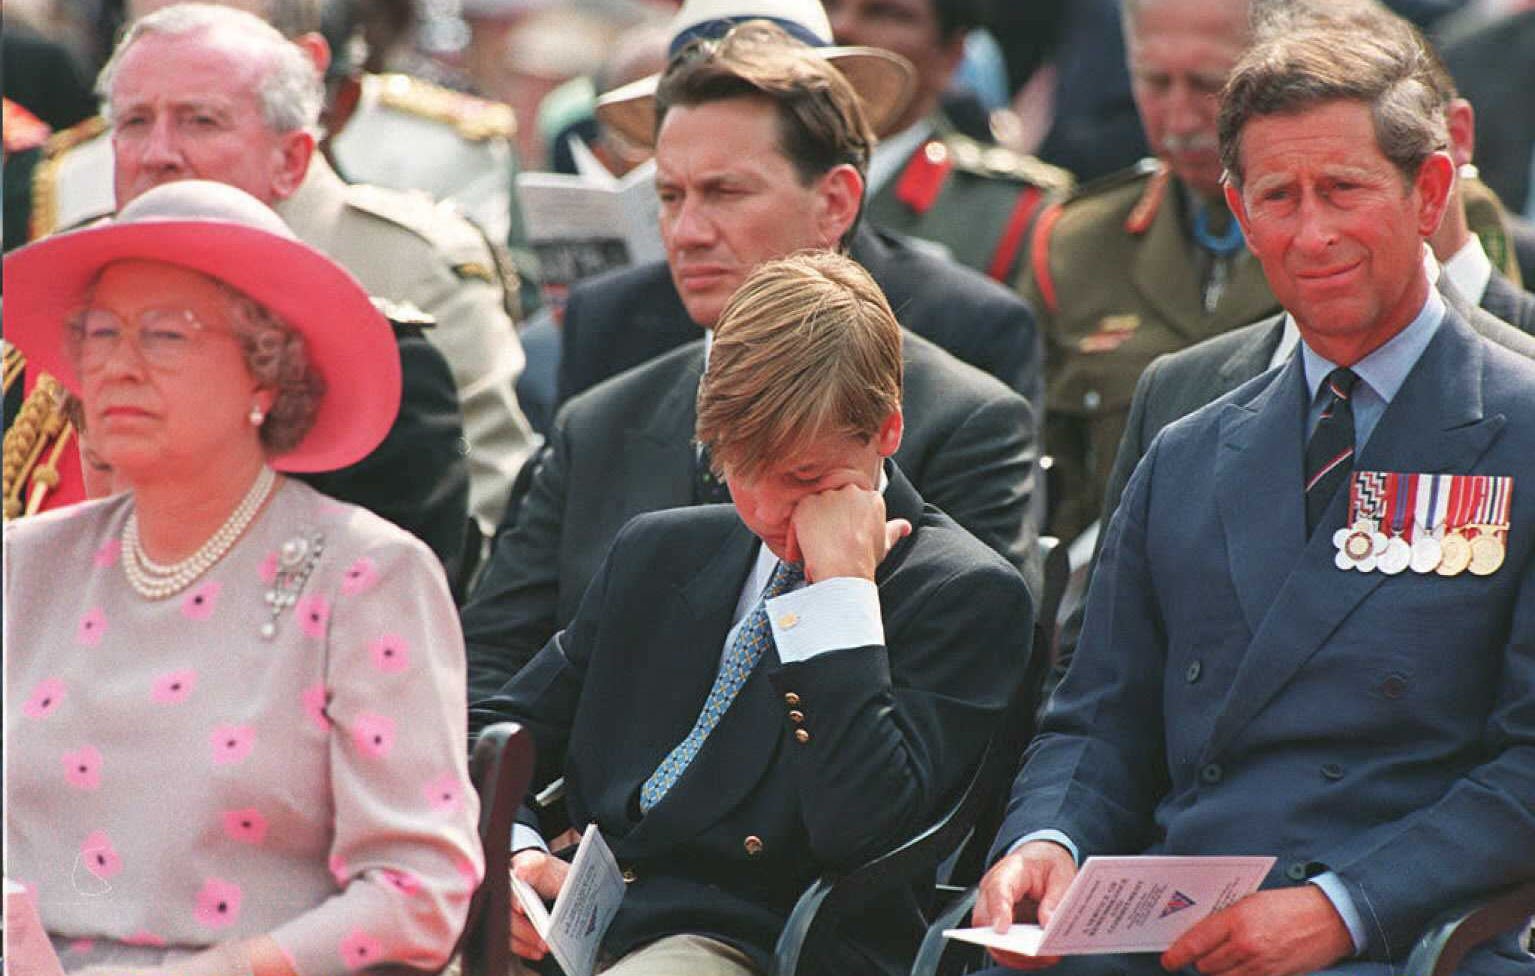 Queen Elizabeth II, Prince William and Prince Charles listen to the outdoor service commemorating VJ day on 19 August in London | Source: Getty Images